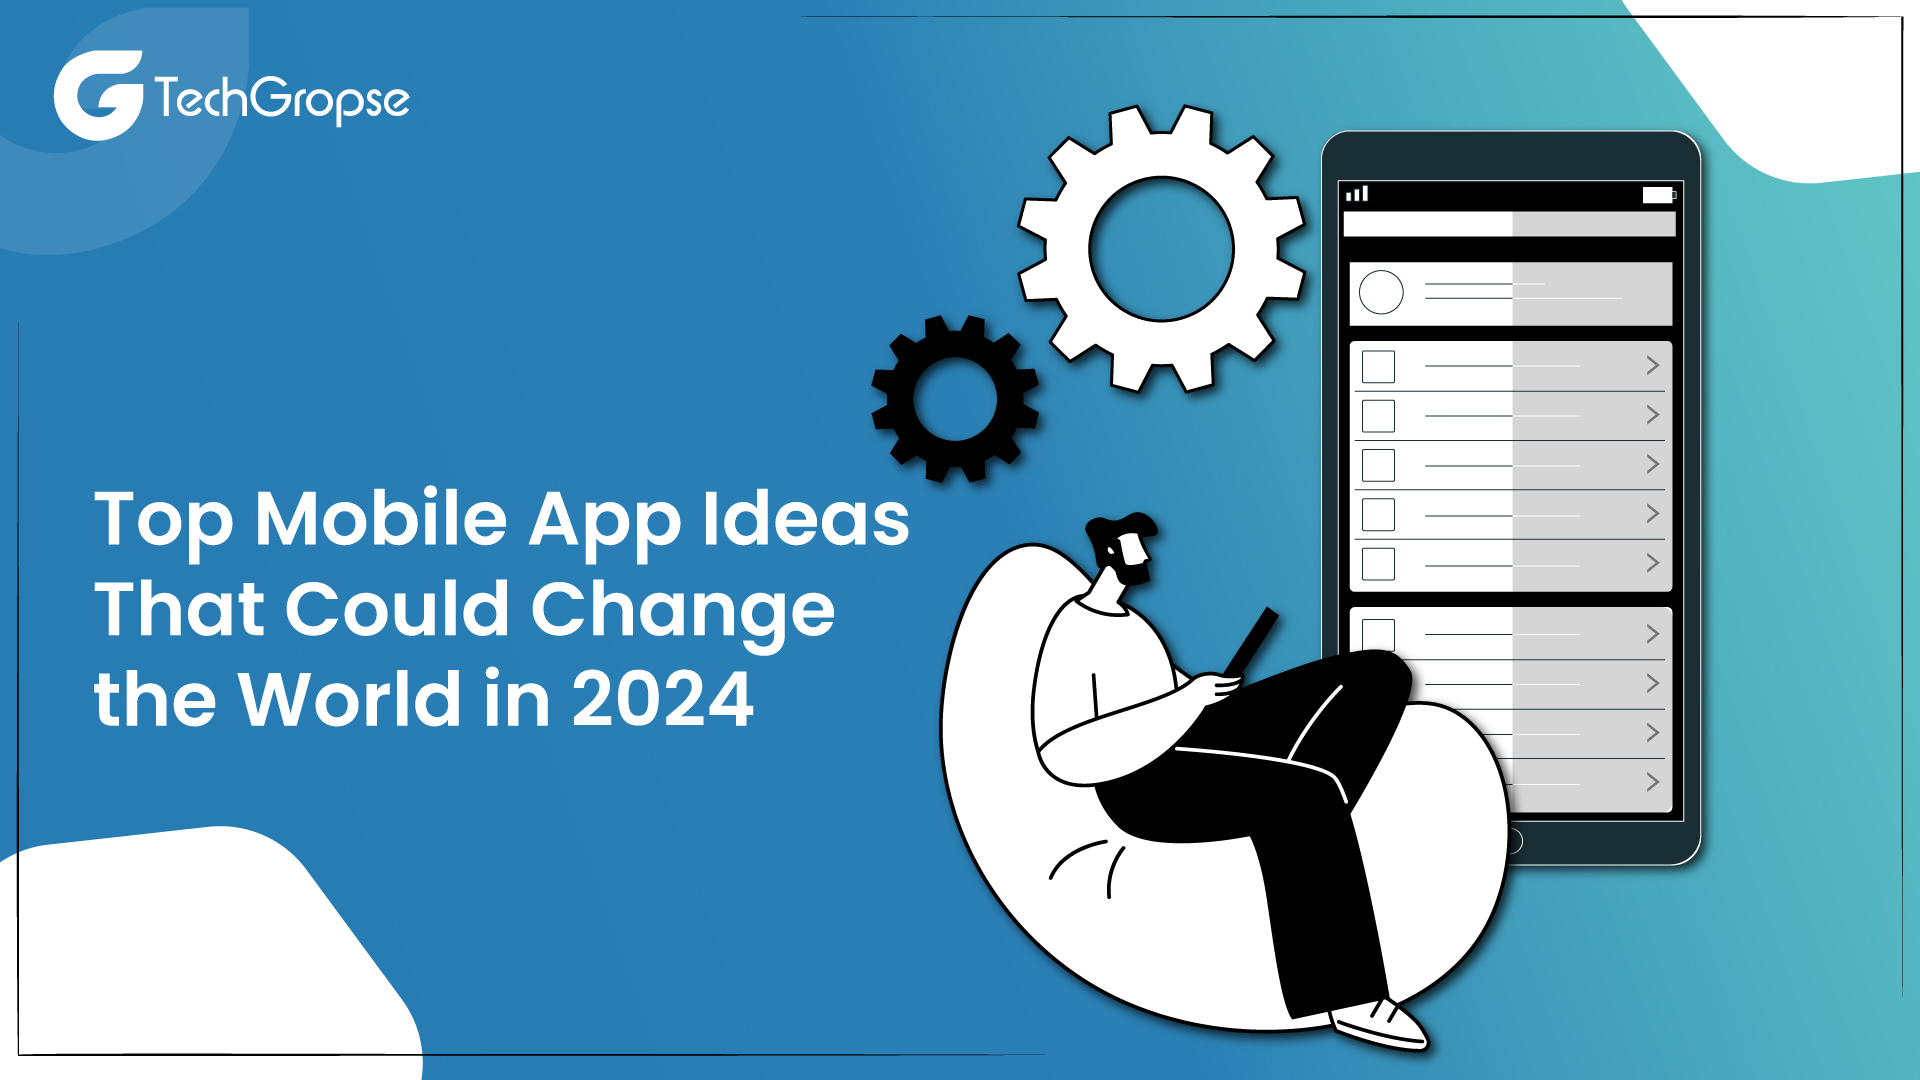 Top Mobile App Ideas That Could Change the World in 2024